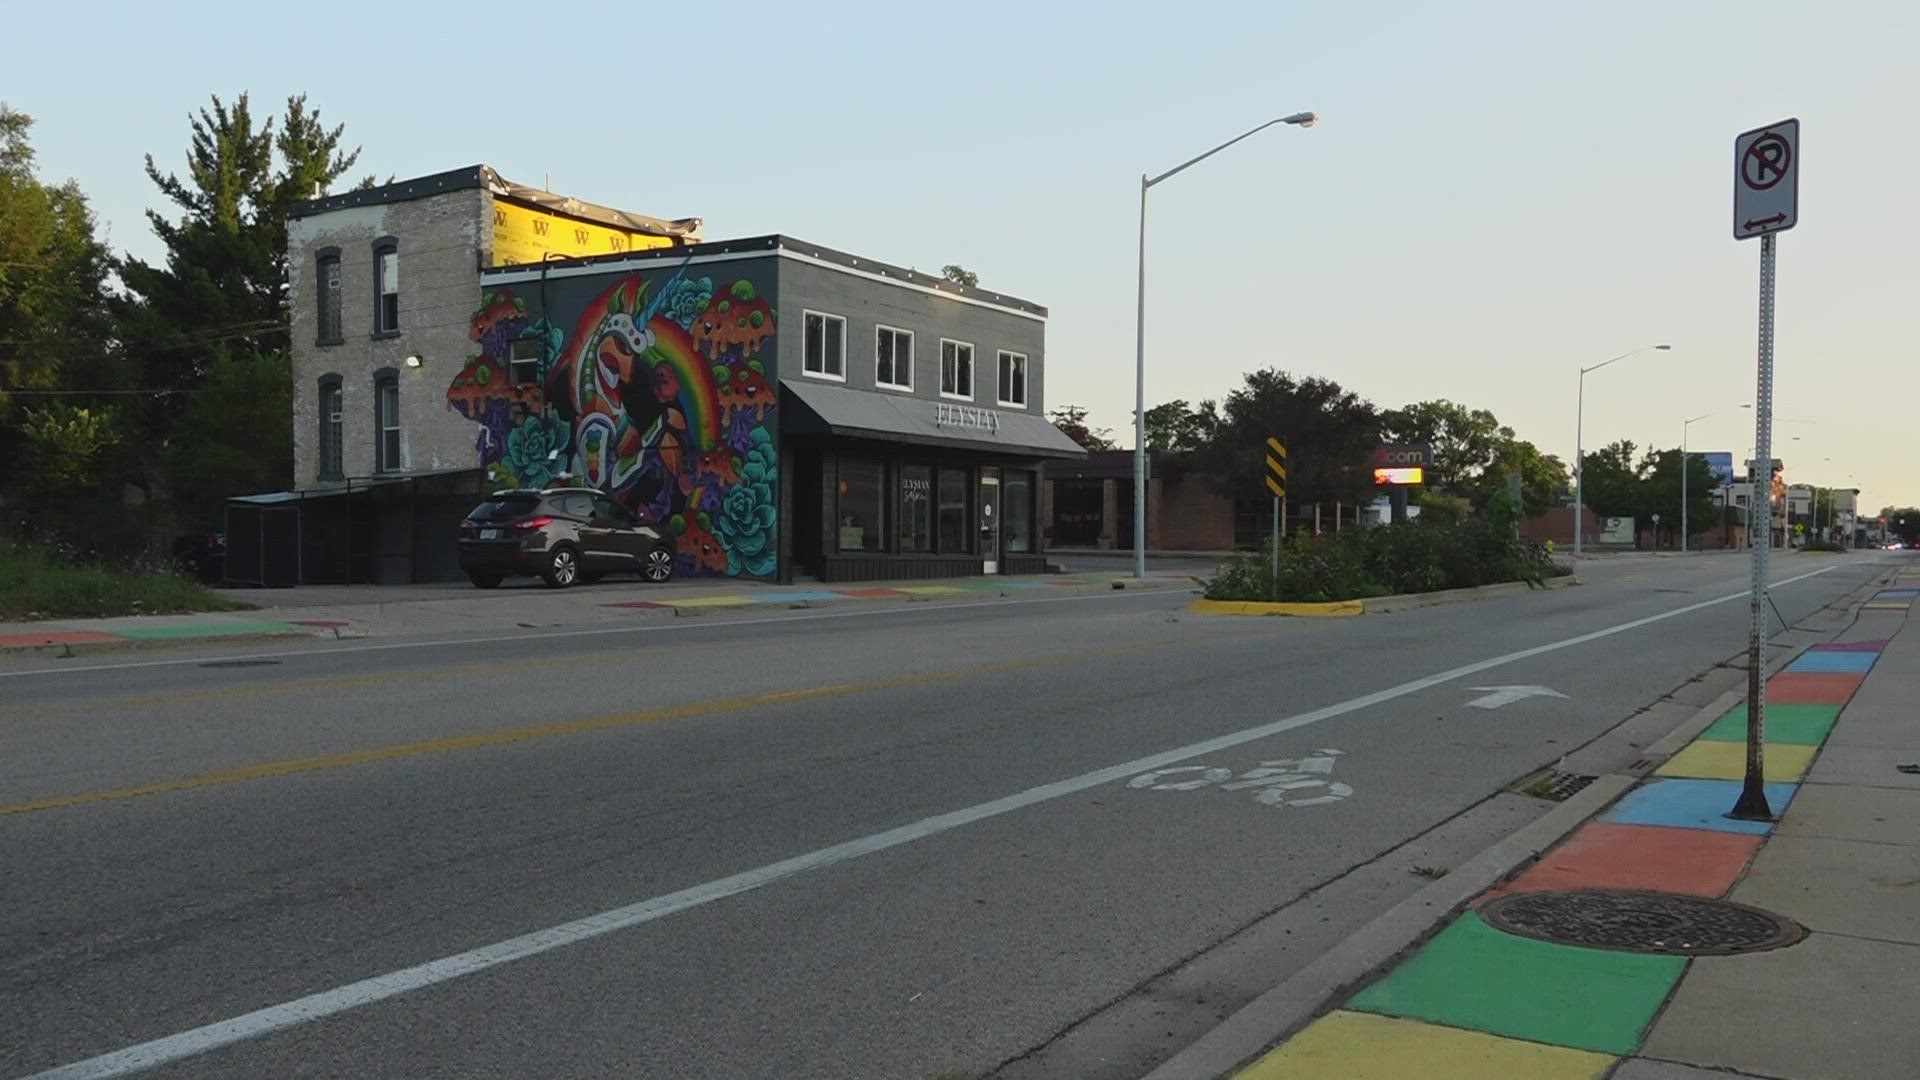 This year ArtPrize is moving beyond its boundary bringing you artwork in different neighborhoods throughout the city.